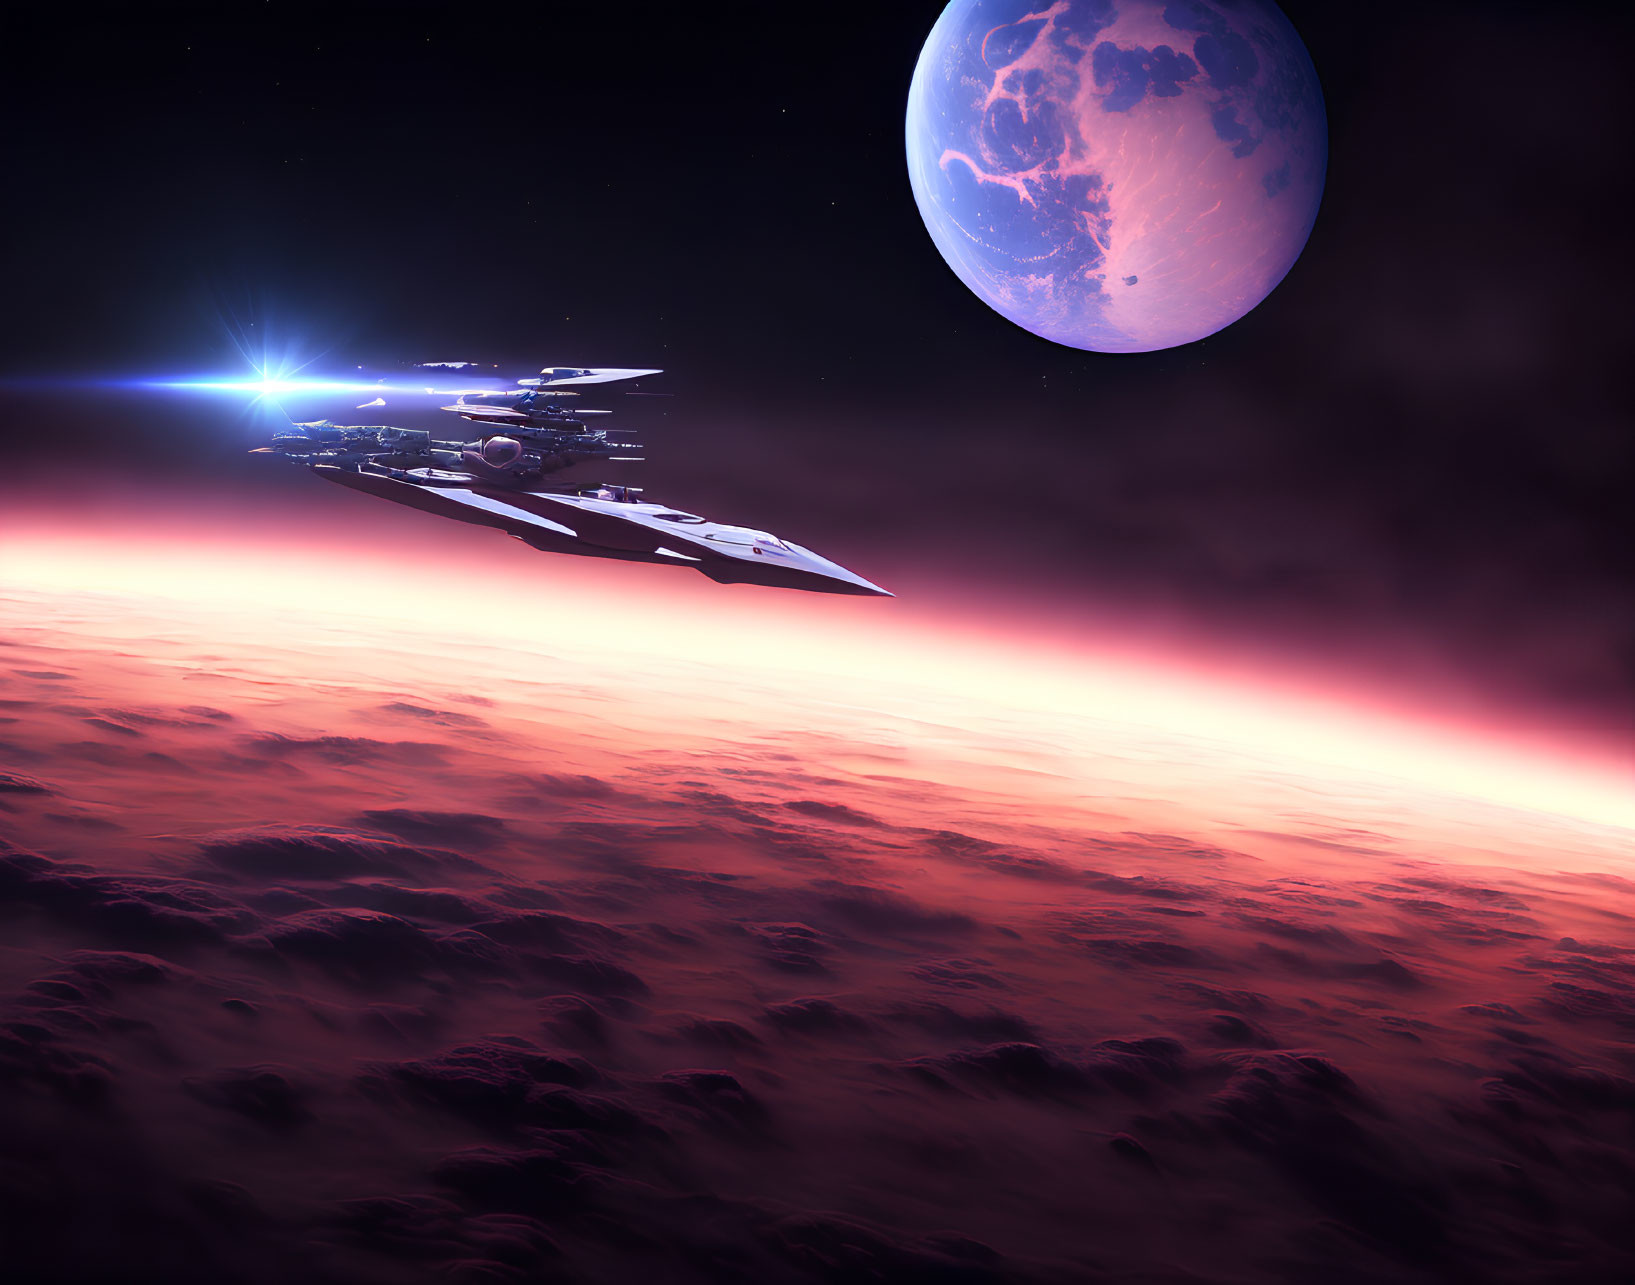 Sci-fi spaceships above alien planet with Earth-like world and star